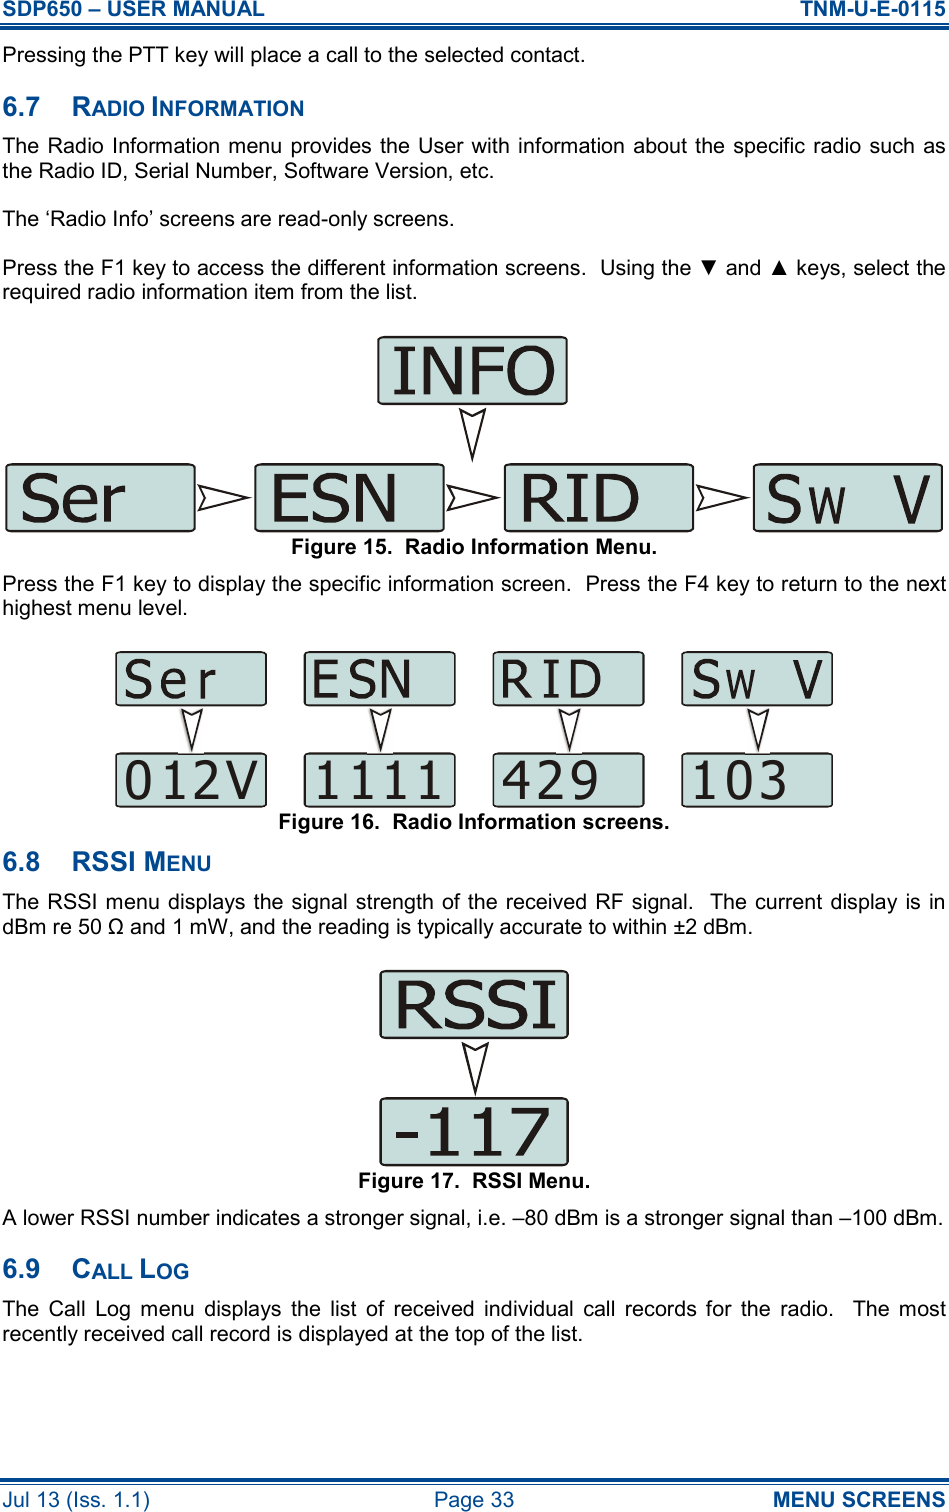 SDP650 – USER MANUAL  TNM-U-E-0115 Jul 13 (Iss. 1.1)  Page 33  MENU SCREENS Pressing the PTT key will place a call to the selected contact. 6.7  RADIO INFORMATION The Radio Information menu provides the User with information about the specific  radio such as the Radio ID, Serial Number, Software Version, etc. The ‘Radio Info’ screens are read-only screens. Press the F1 key to access the different information screens.  Using the ▼ and ▲ keys, select the required radio information item from the list. Figure 15.  Radio Information Menu. Press the F1 key to display the specific information screen.  Press the F4 key to return to the next highest menu level. Figure 16.  Radio Information screens. 6.8  RSSI MENU The RSSI menu displays the signal strength of the received RF signal.  The current display is in dBm re 50 Ω and 1 mW, and the reading is typically accurate to within ±2 dBm.  Figure 17.  RSSI Menu. A lower RSSI number indicates a stronger signal, i.e. –80 dBm is a stronger signal than –100 dBm. 6.9  CALL LOG The  Call  Log  menu  displays  the  list  of  received  individual  call  records  for  the  radio.    The  most recently received call record is displayed at the top of the list. 012V1111429103